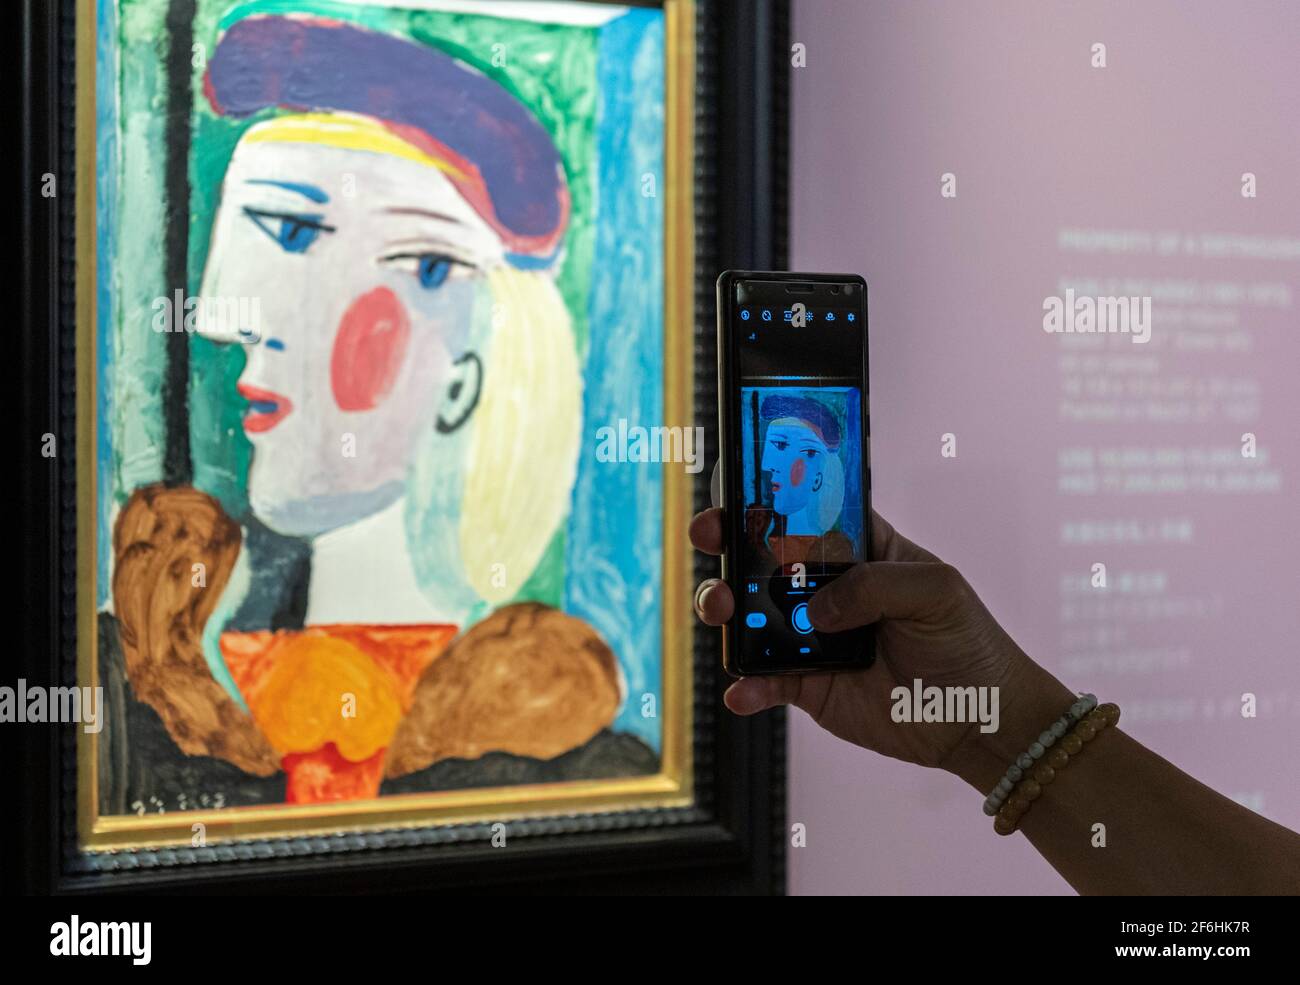 Hong Kong, Hong Kong, China. 1st Apr, 2021. Cristina Wang, specialist in Modern and Contemporary Art adjusts the Pablo Picasso' painting 'Femme au Béret Mauve'' on display at the Bonham Gallery in Admiralty Hong Kong ahead of its sale in New York in May 2021. The painting o f Picasso's greatest muse Mare-ThérÃ¨se Walter is on a world tour to attract buyers having been in London and Paris ahead of Hong Kong. A price of $15 million USD is estimated for the masterpiece. Credit: Jayne Russell/ZUMA Wire/Alamy Live News Stock Photo